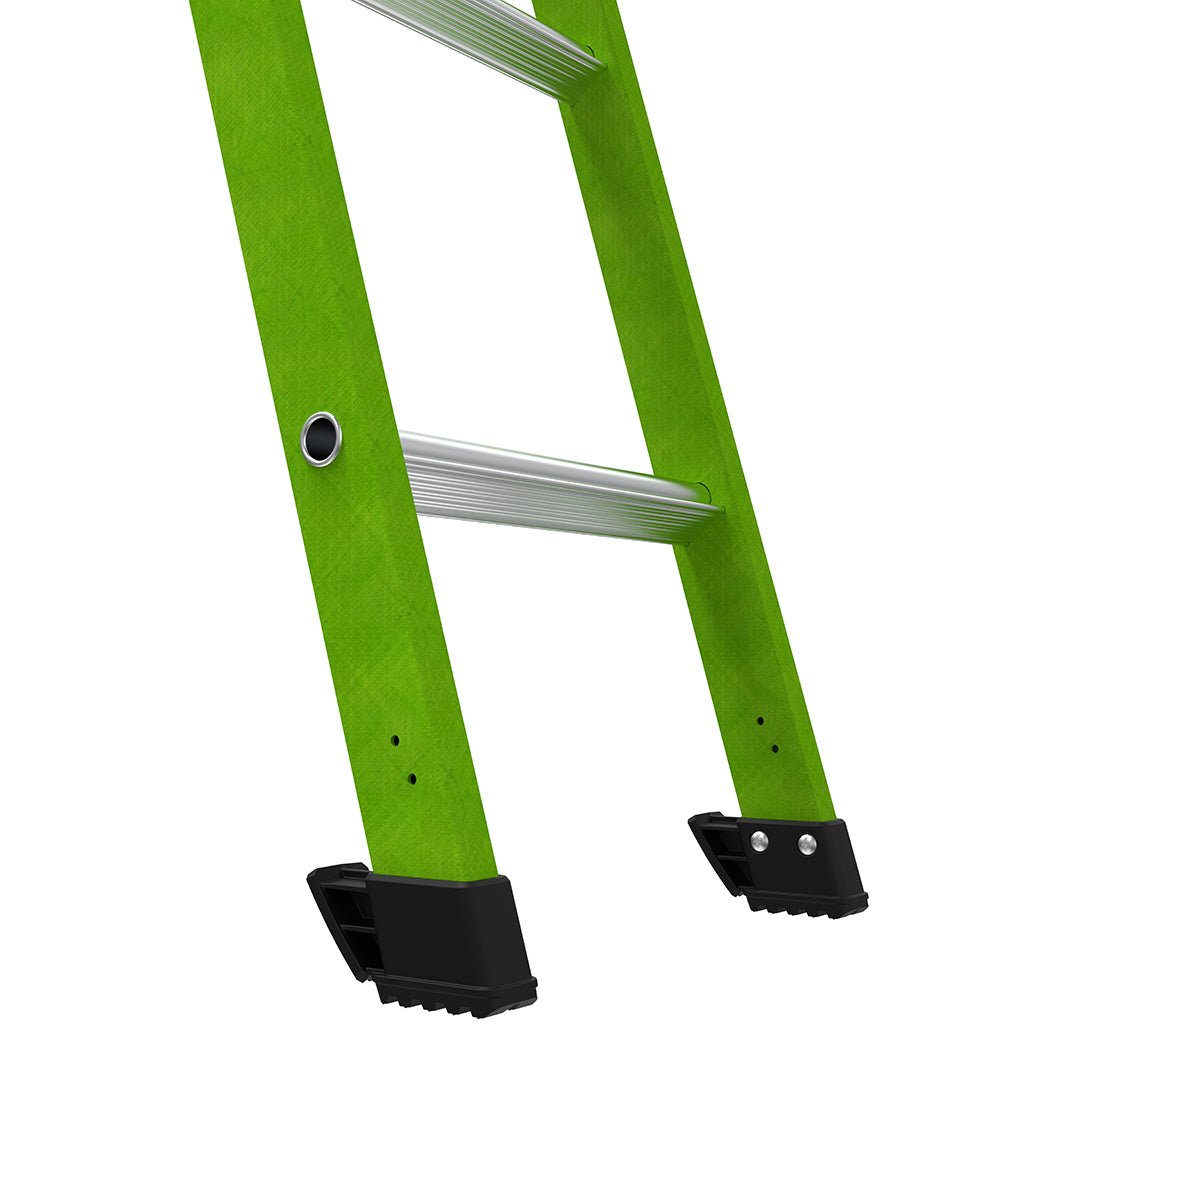 Little Giant 13908-303 - KING KOMBO, Professional, M8, 8’- CSA Grade Type IAA – 375 lb/170 kg Rated, Fiberglass, 3-in-1 Combination Ladder, Rotating Wall Pad, GRIP-N-GO Single-Hand Release Hinge